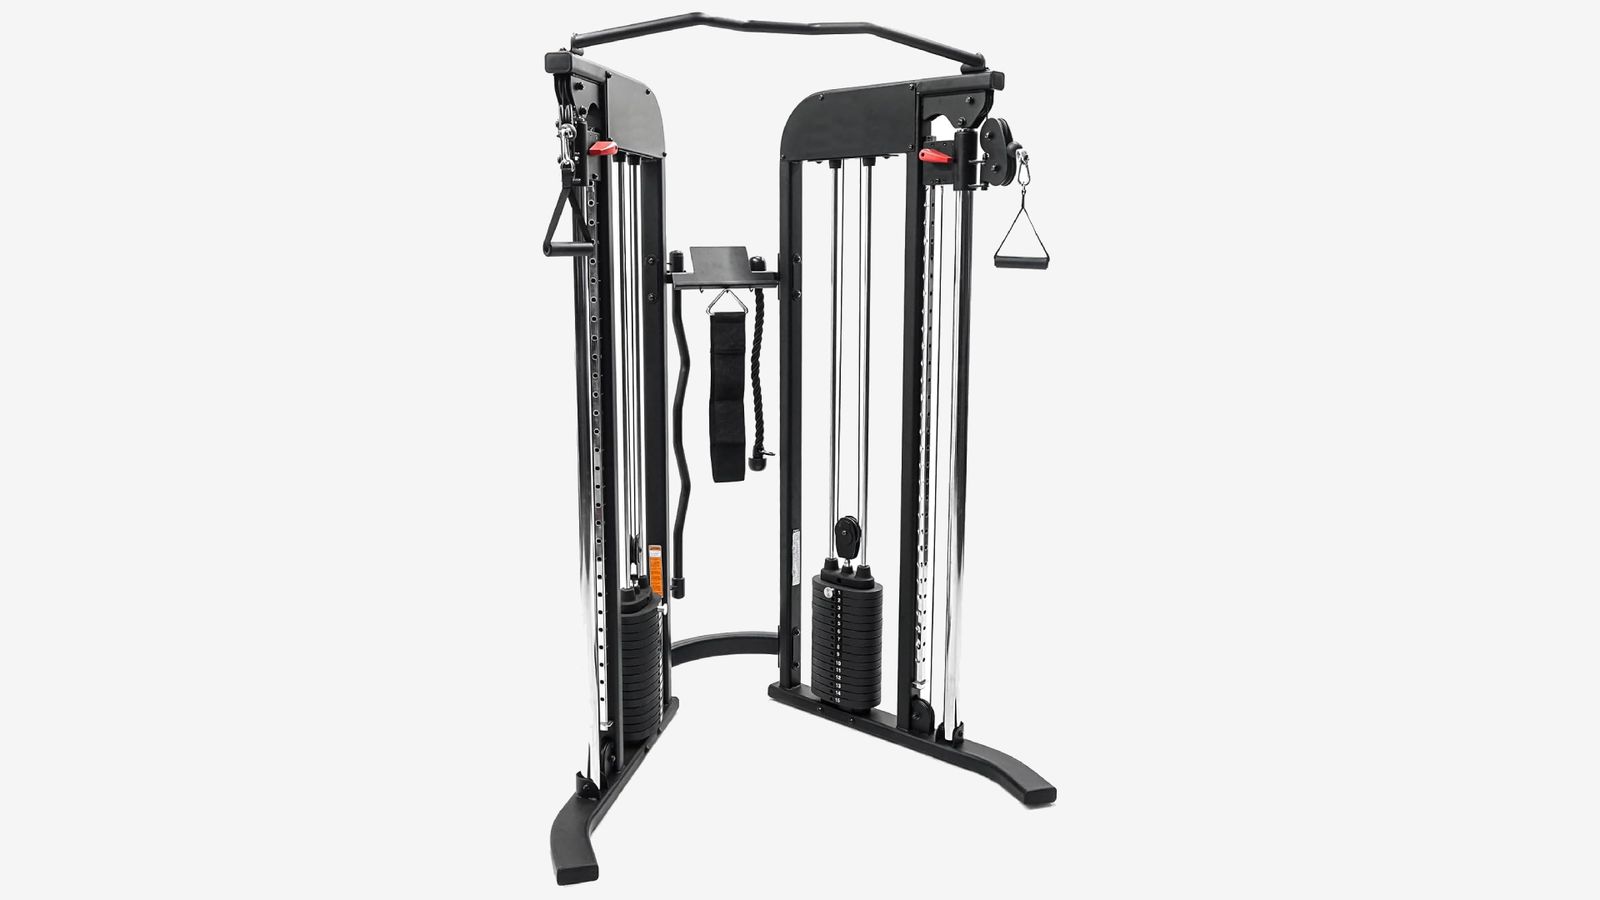 Inspire Fitness FTX product image of a black and silver cable machine featuring two weight stacks either side.